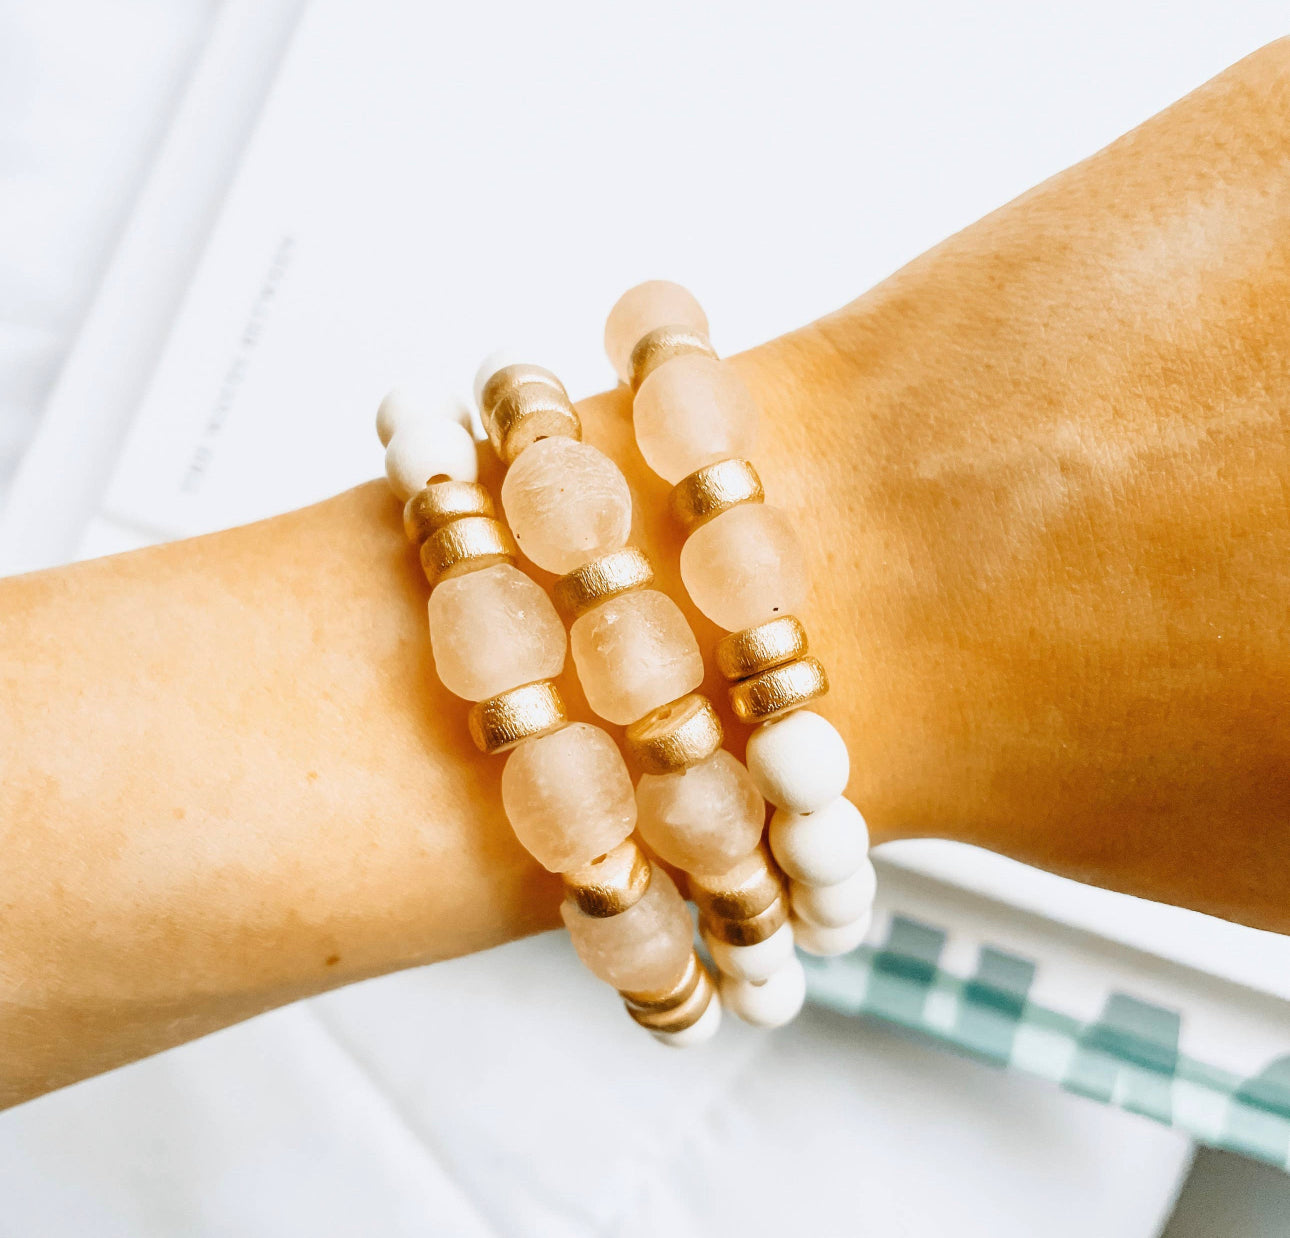 Blush Island Bracelets on wrist that are Handmade in the USA